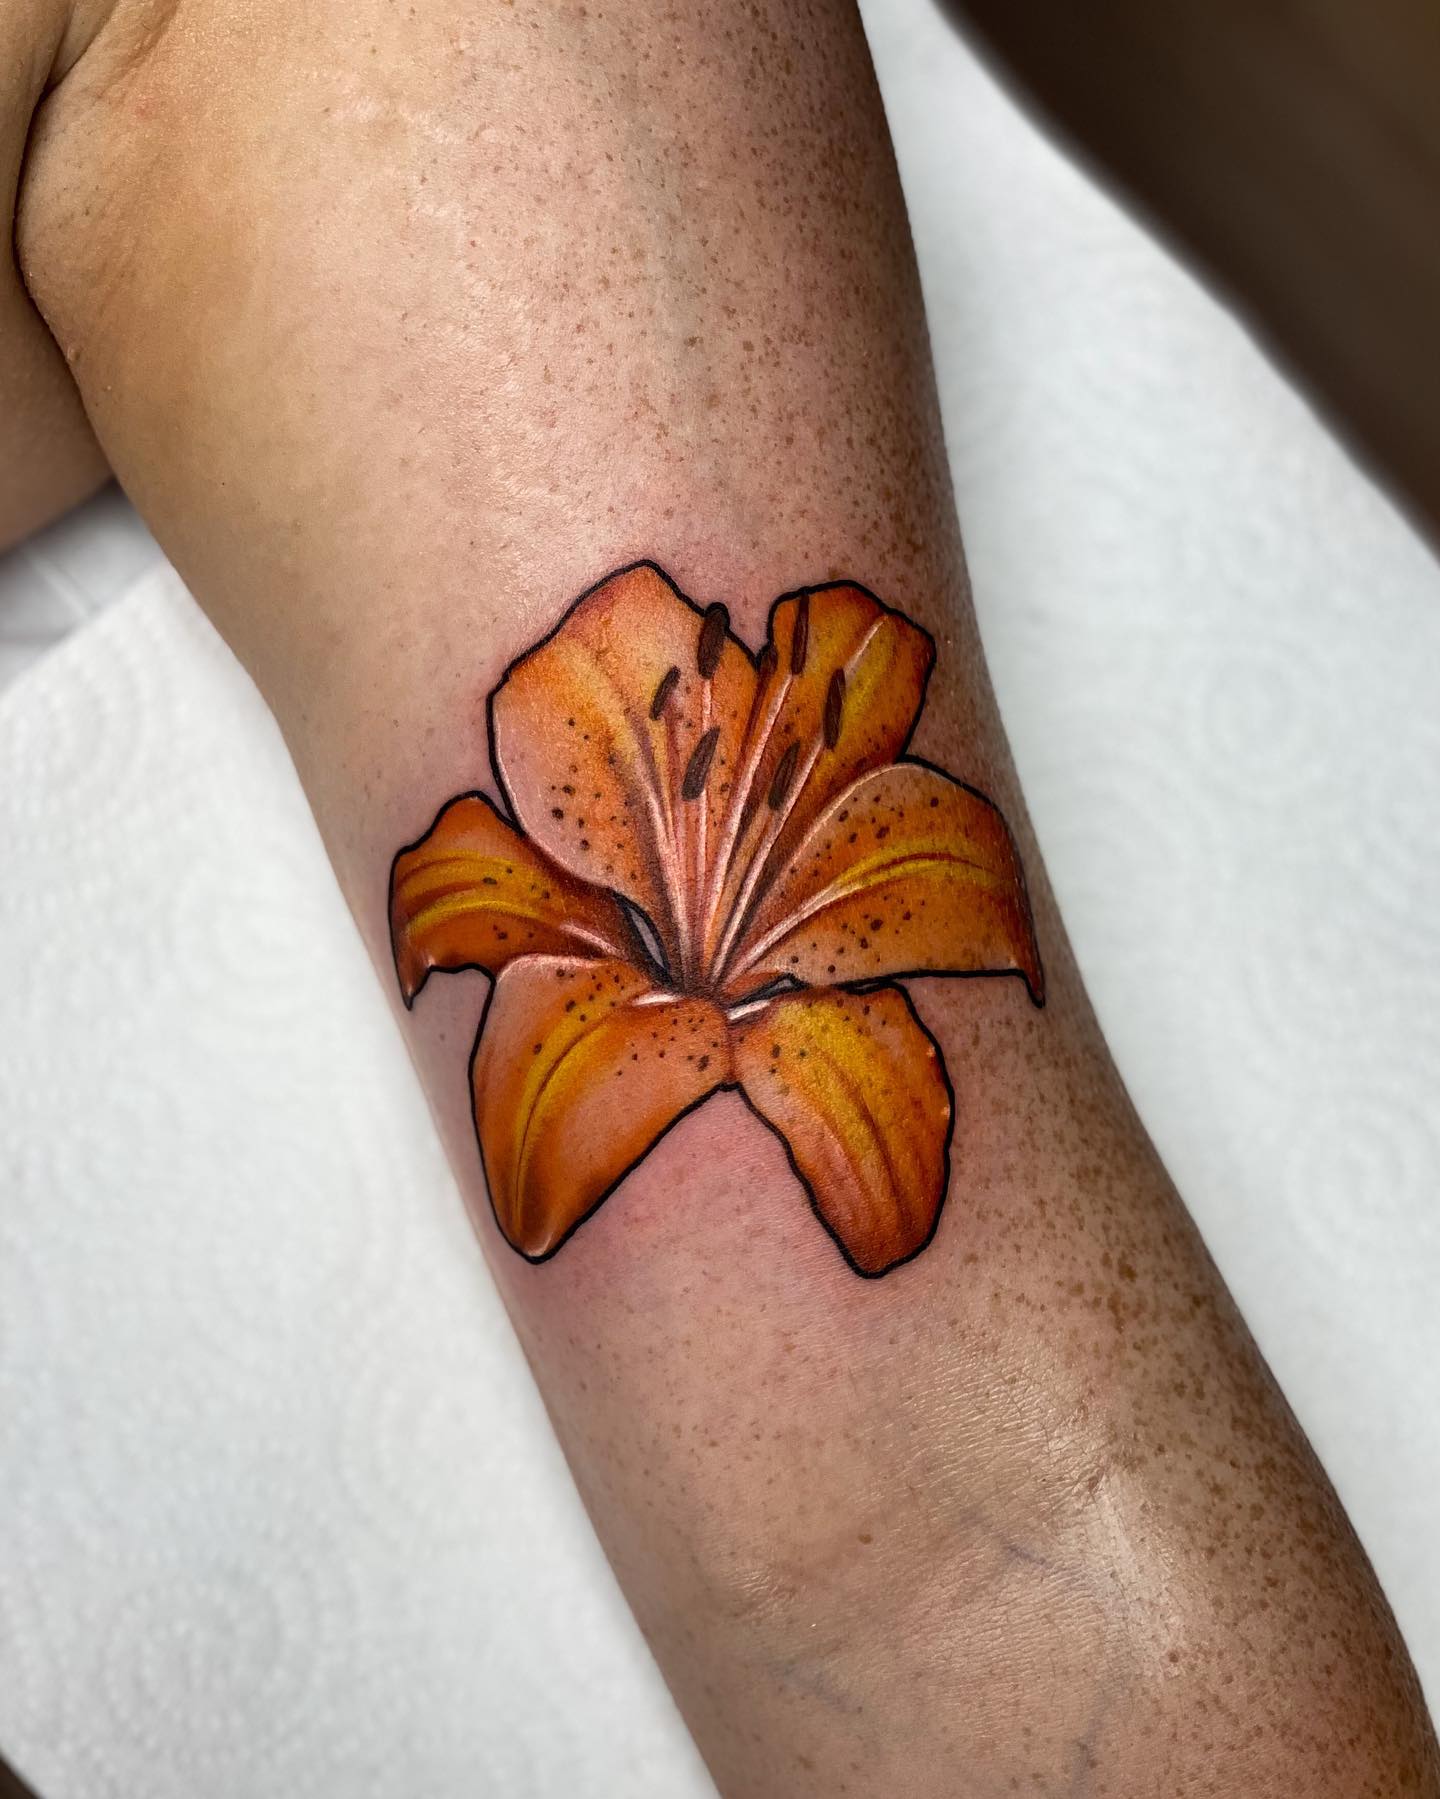 The plain orange lily tattoo is a beautiful symbol of purity and optimism. Those who want a simple lily tattoo will definitely fall in love with this! Go and get it on your arm as soon as possible!